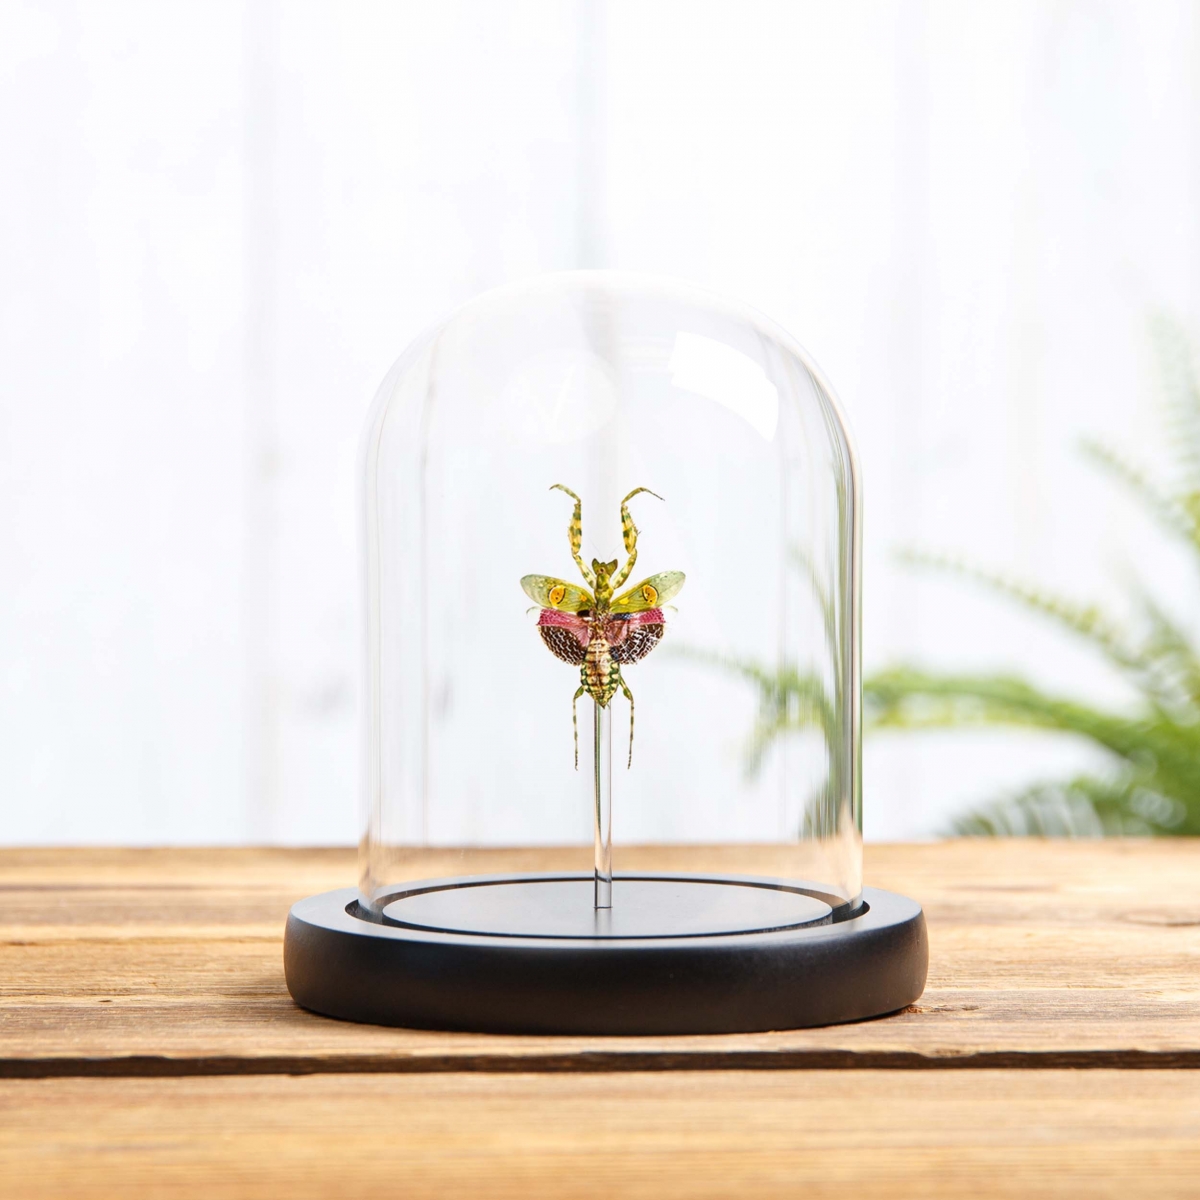 Minibeast Indian Flower Mantis in Glass Dome with Wooden Base (Creobroter gemmatus)